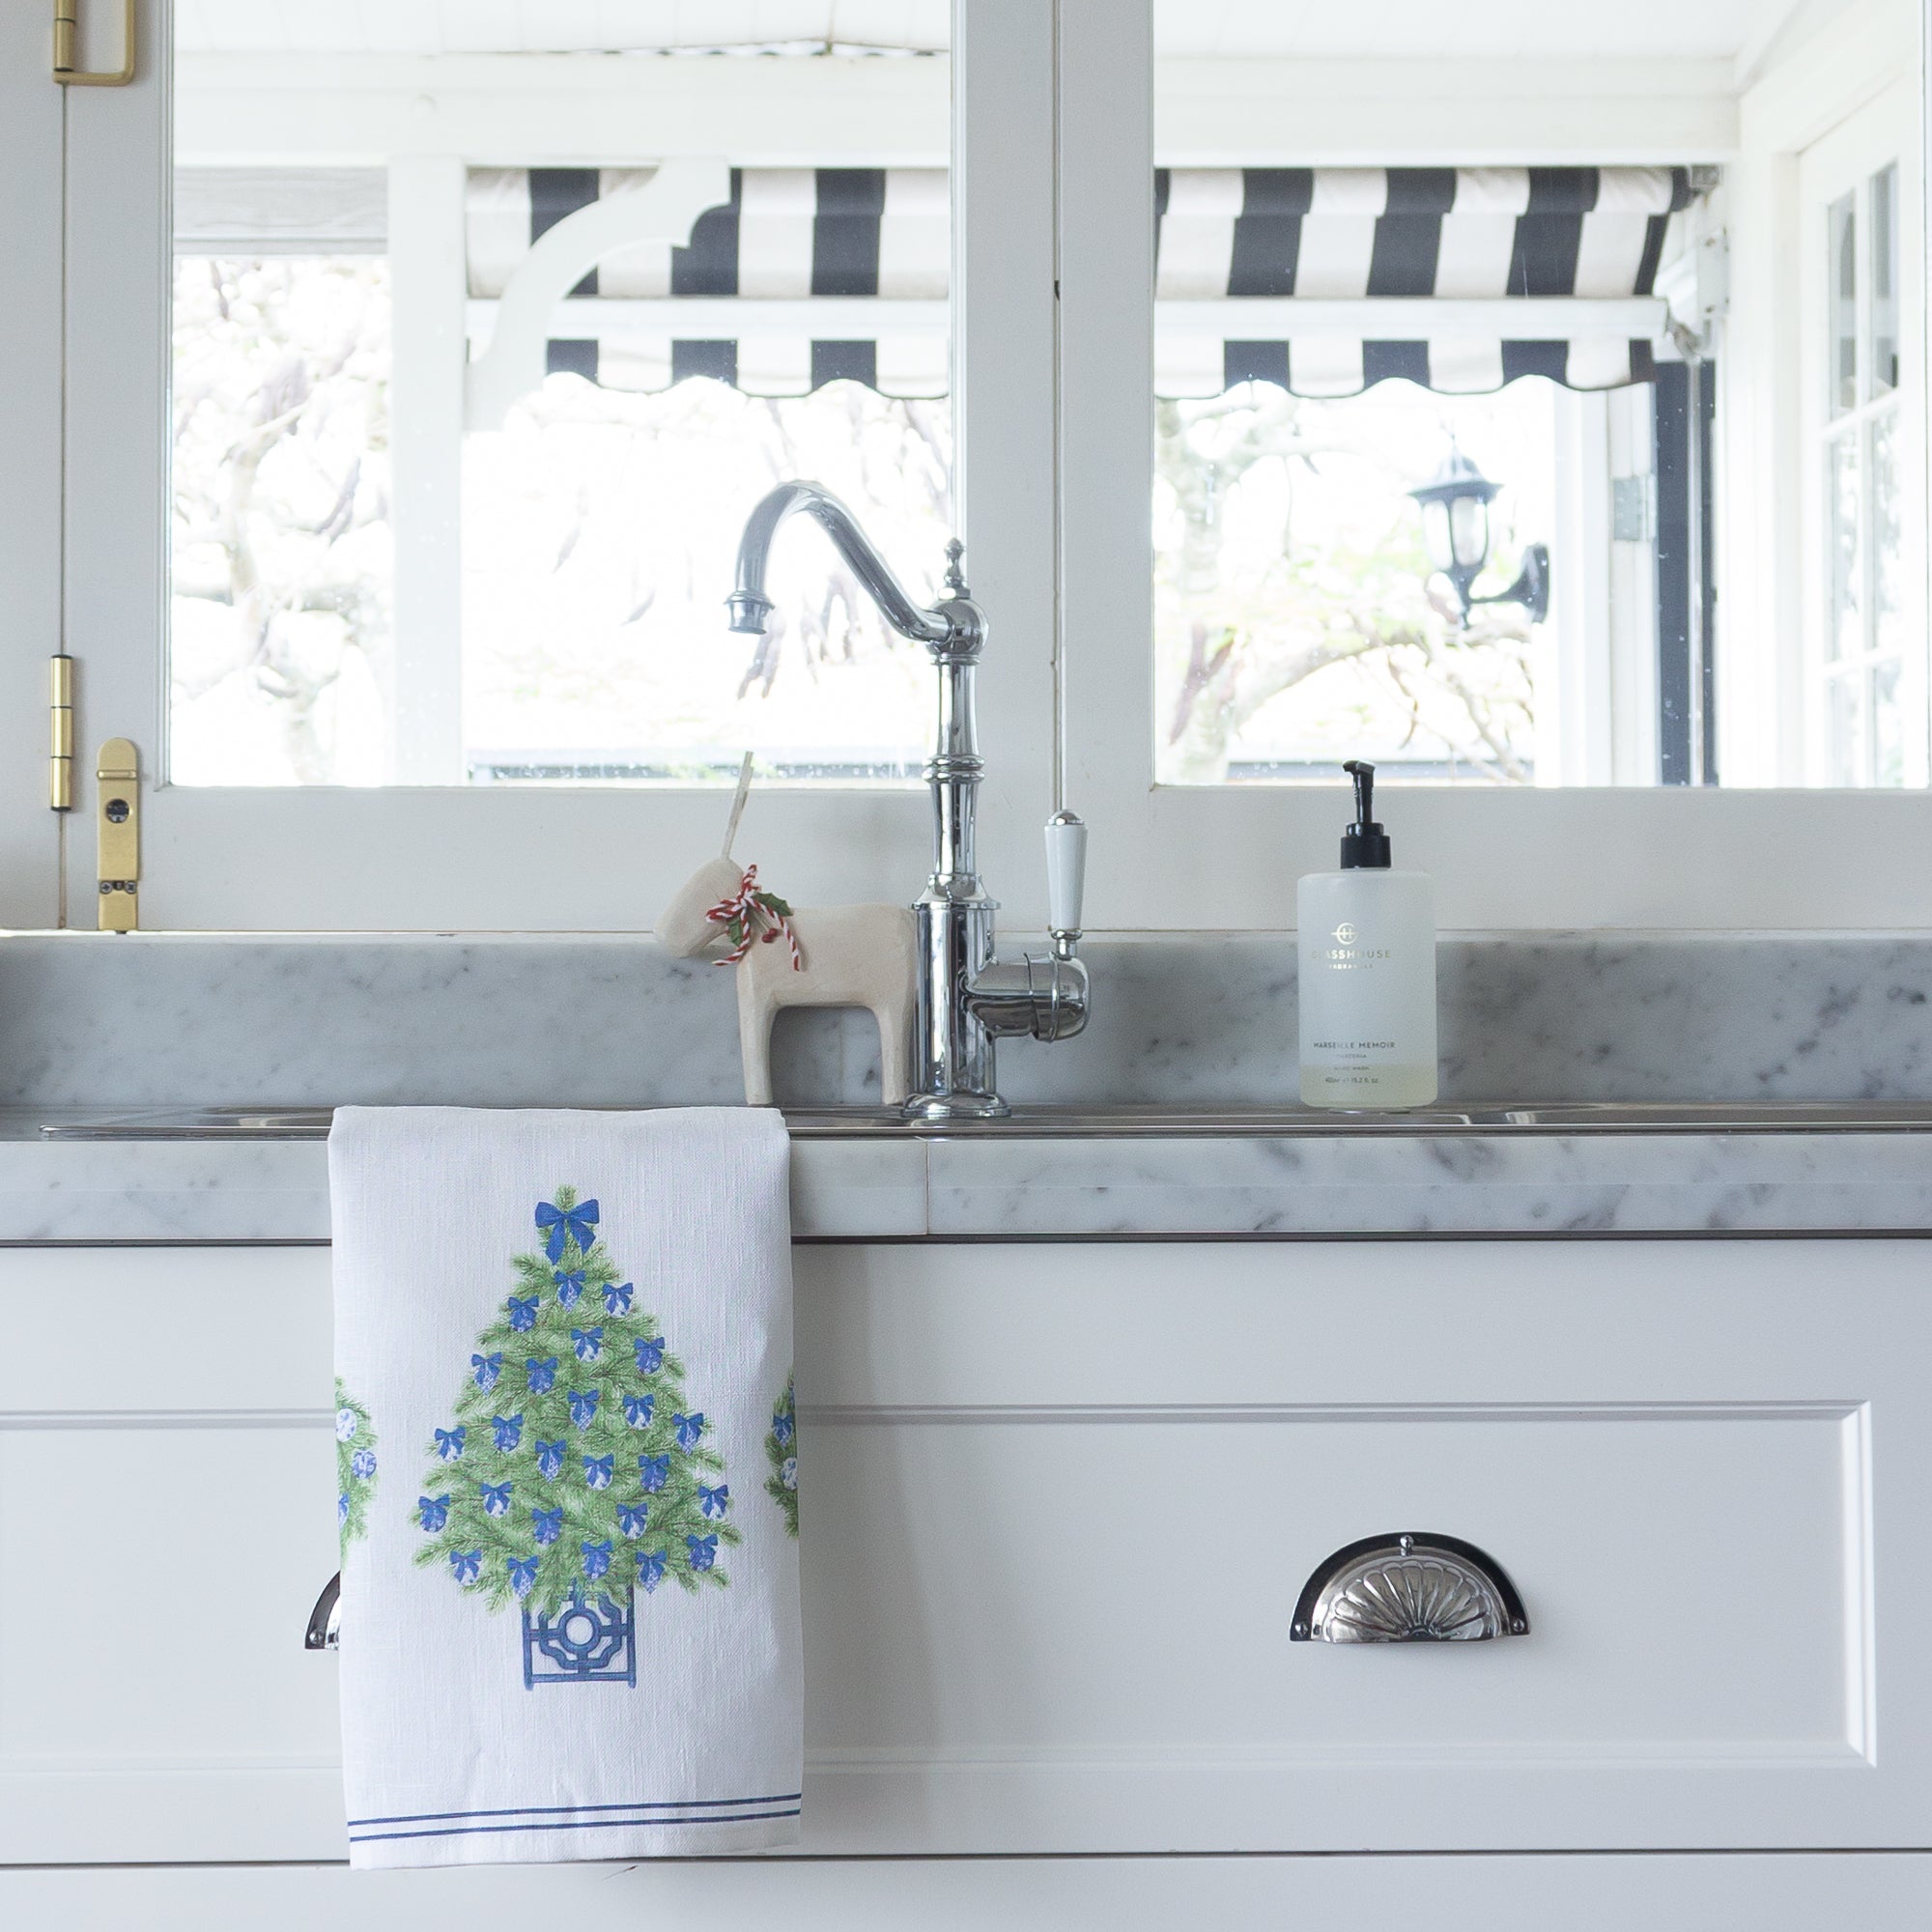 Holiday Campground – Kitchen Tea Towel